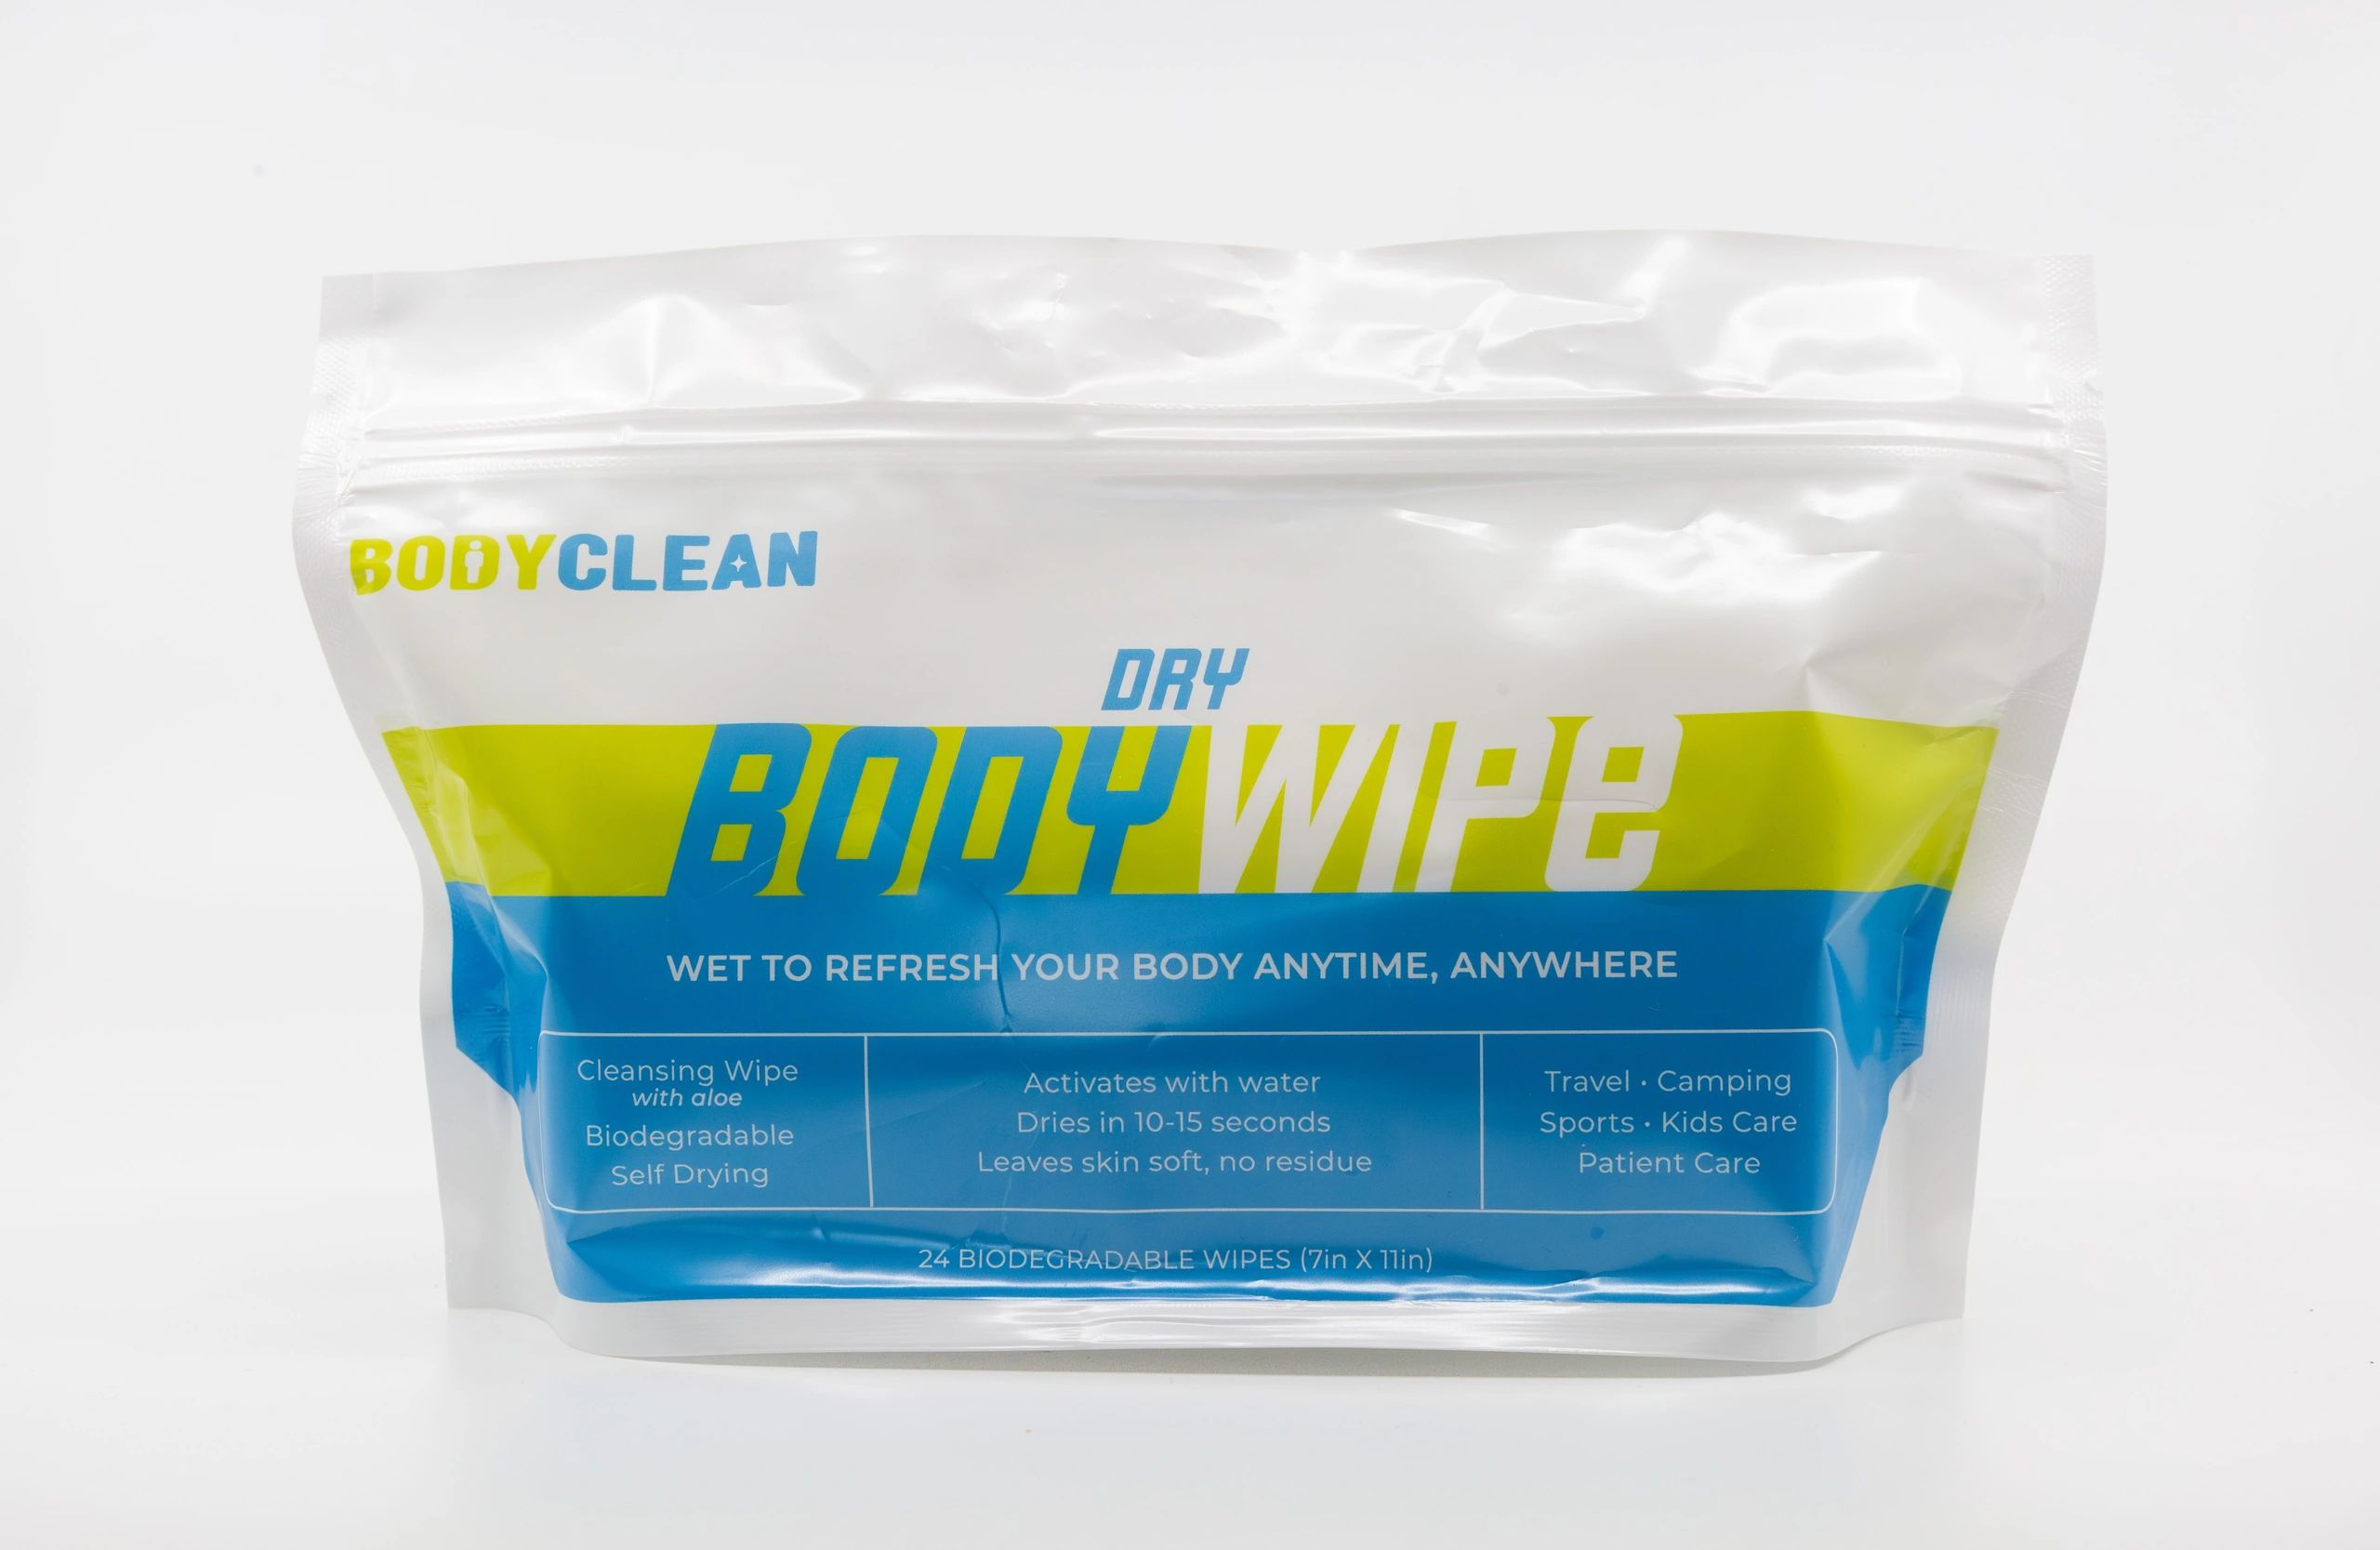 Body Clean Dry Wipes - dry wipe with soap, Vitamin E, Aloe; used for cleaning body; self-drying